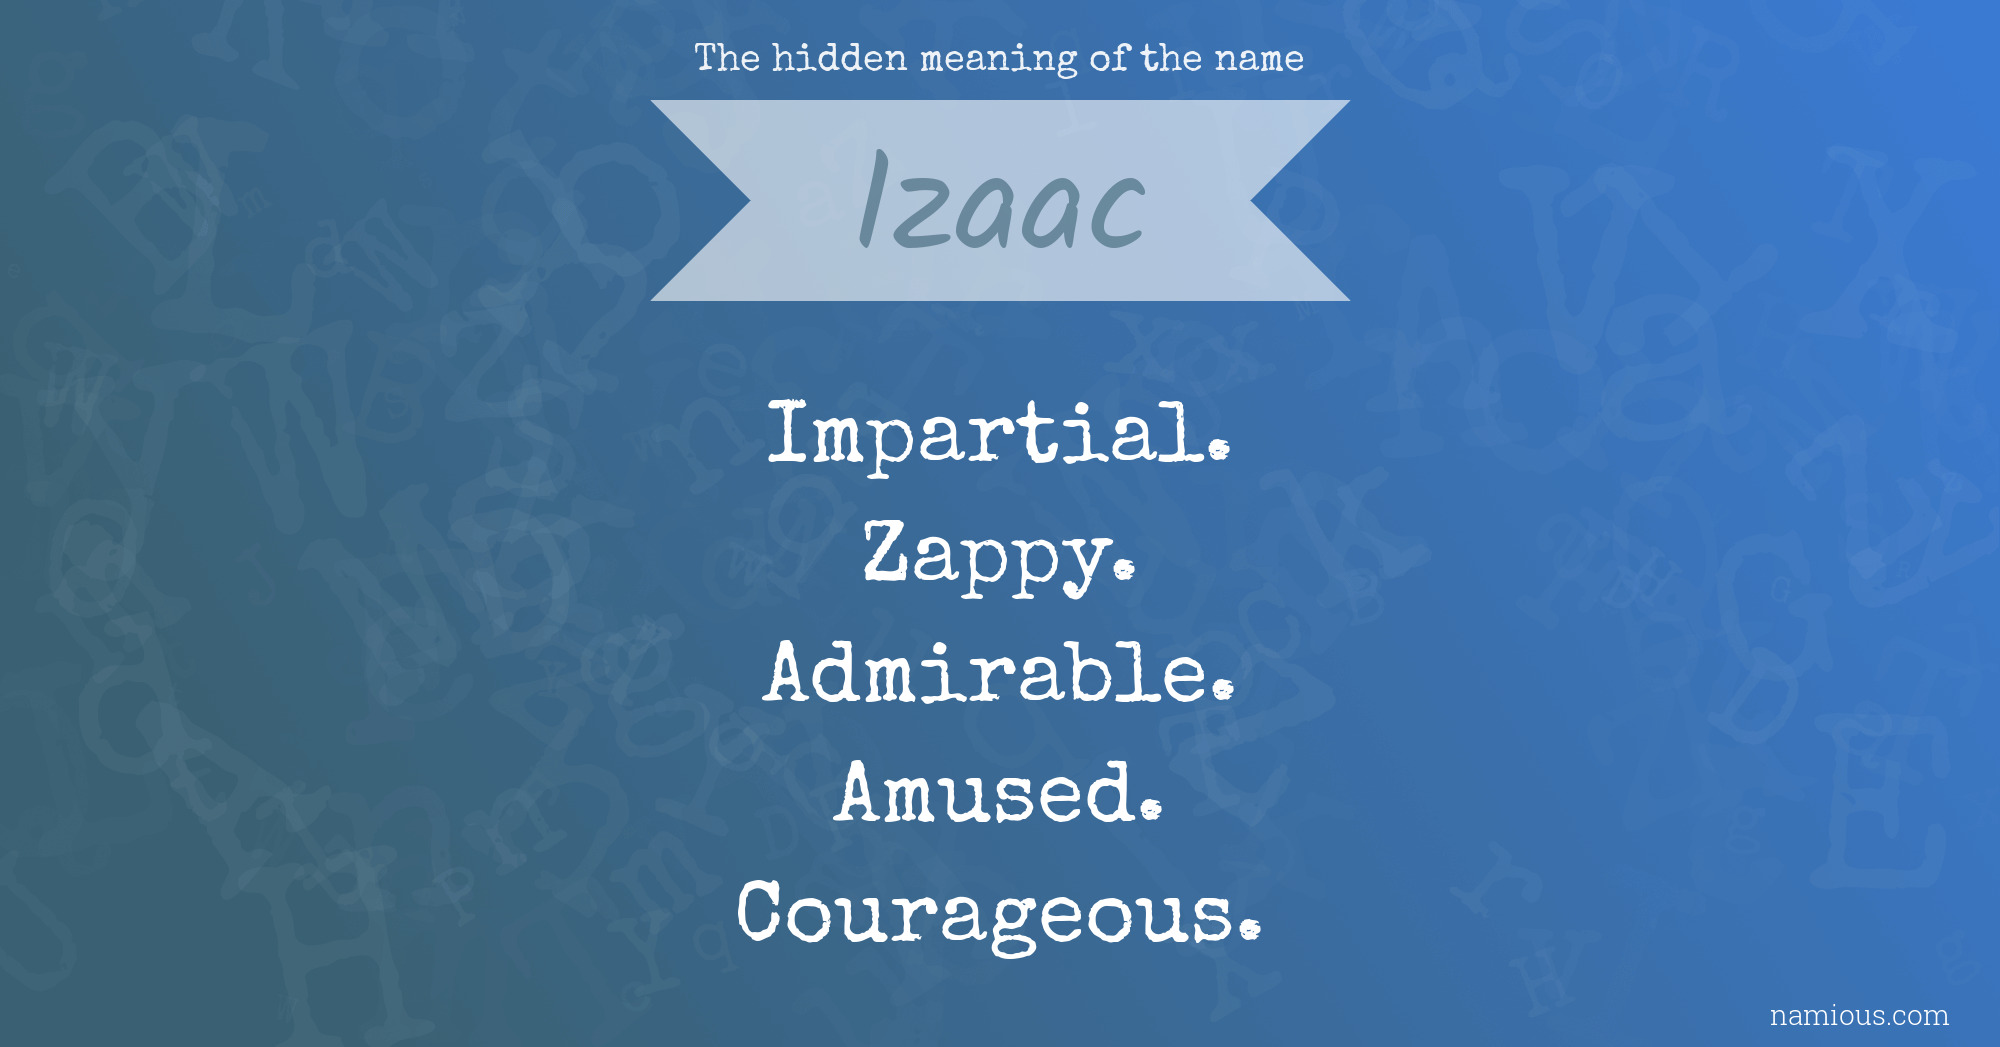 The hidden meaning of the name Izaac